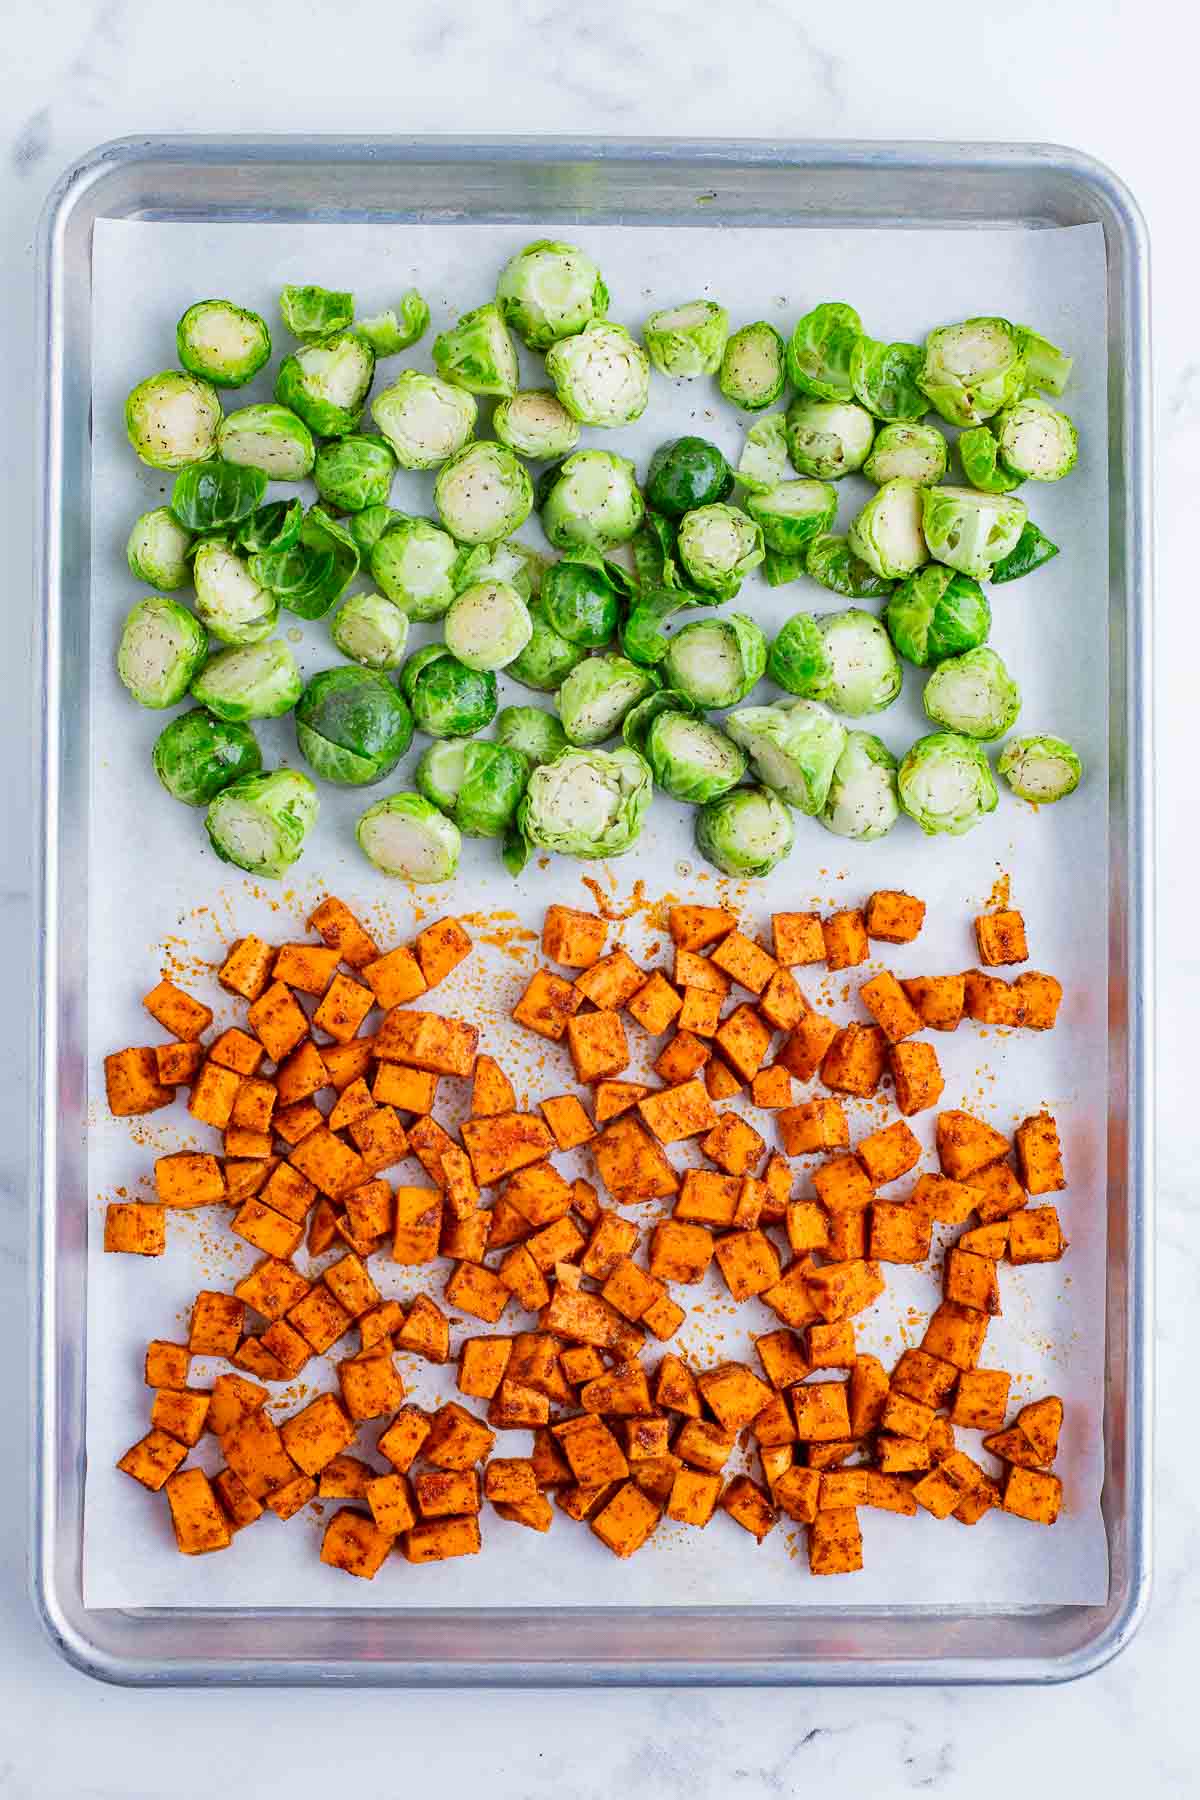 Sweet potatoes and Brussels sprouts are baked in the oven.